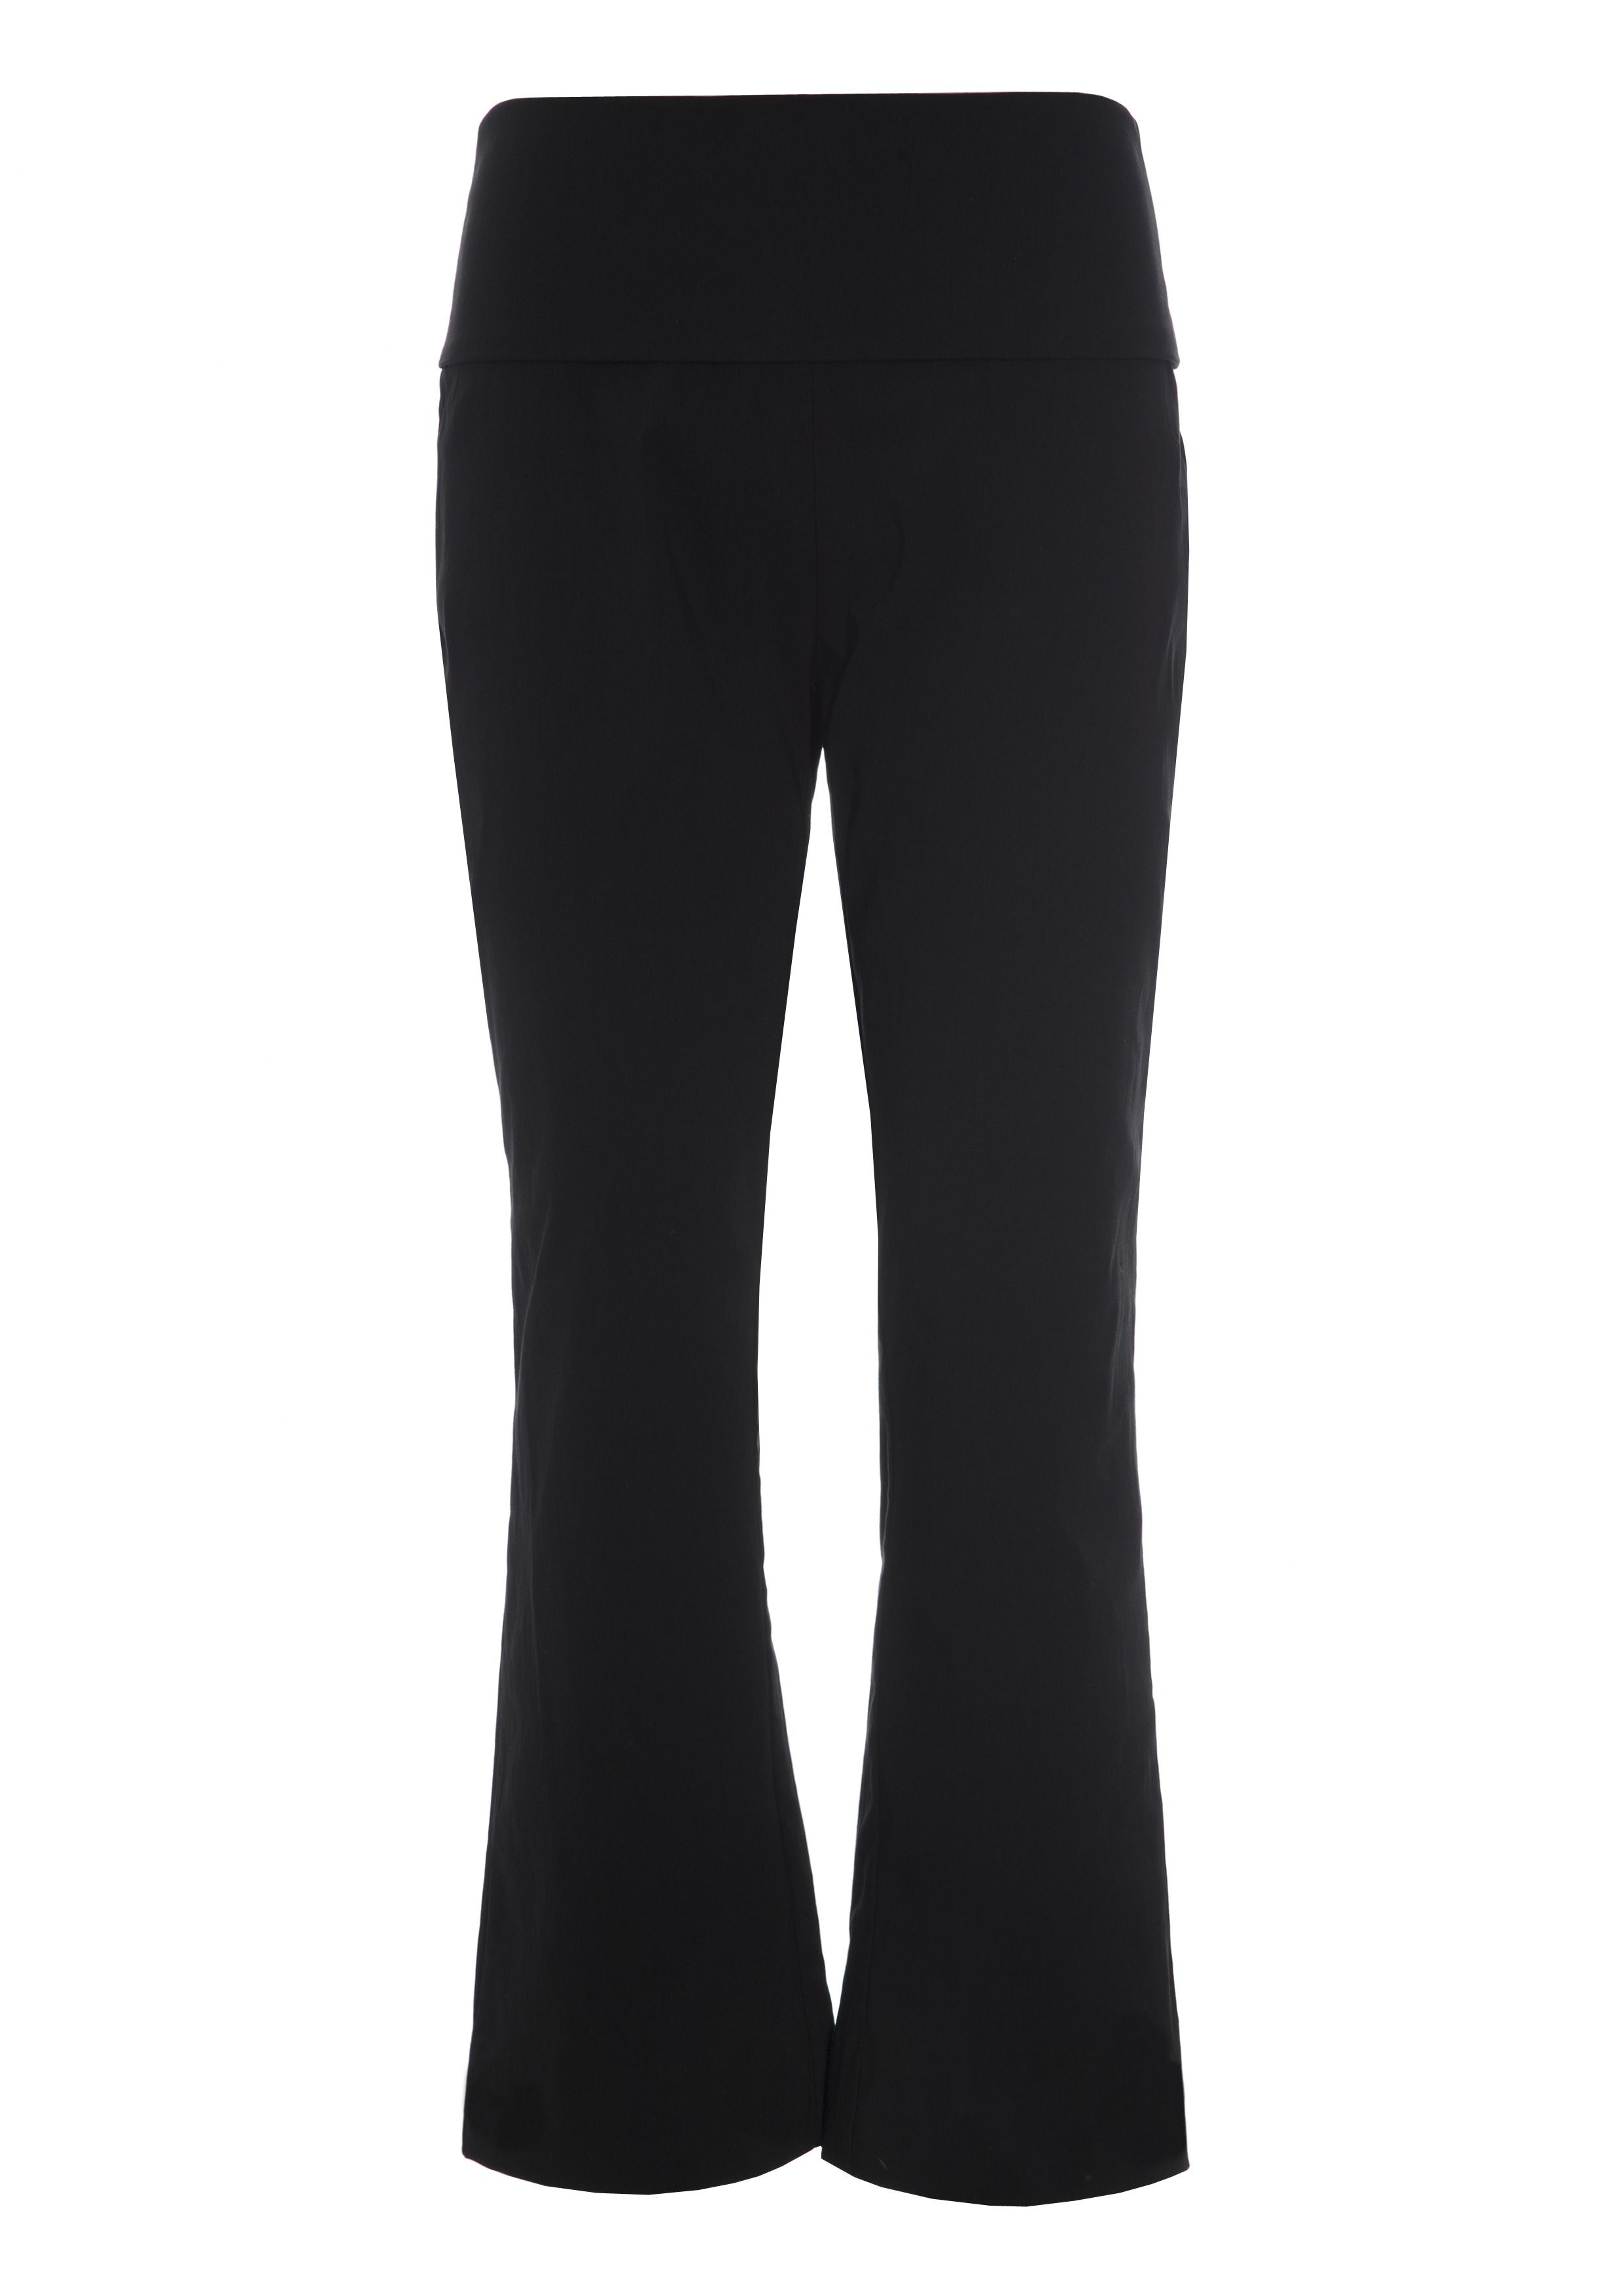 Magic stretch pants with flare